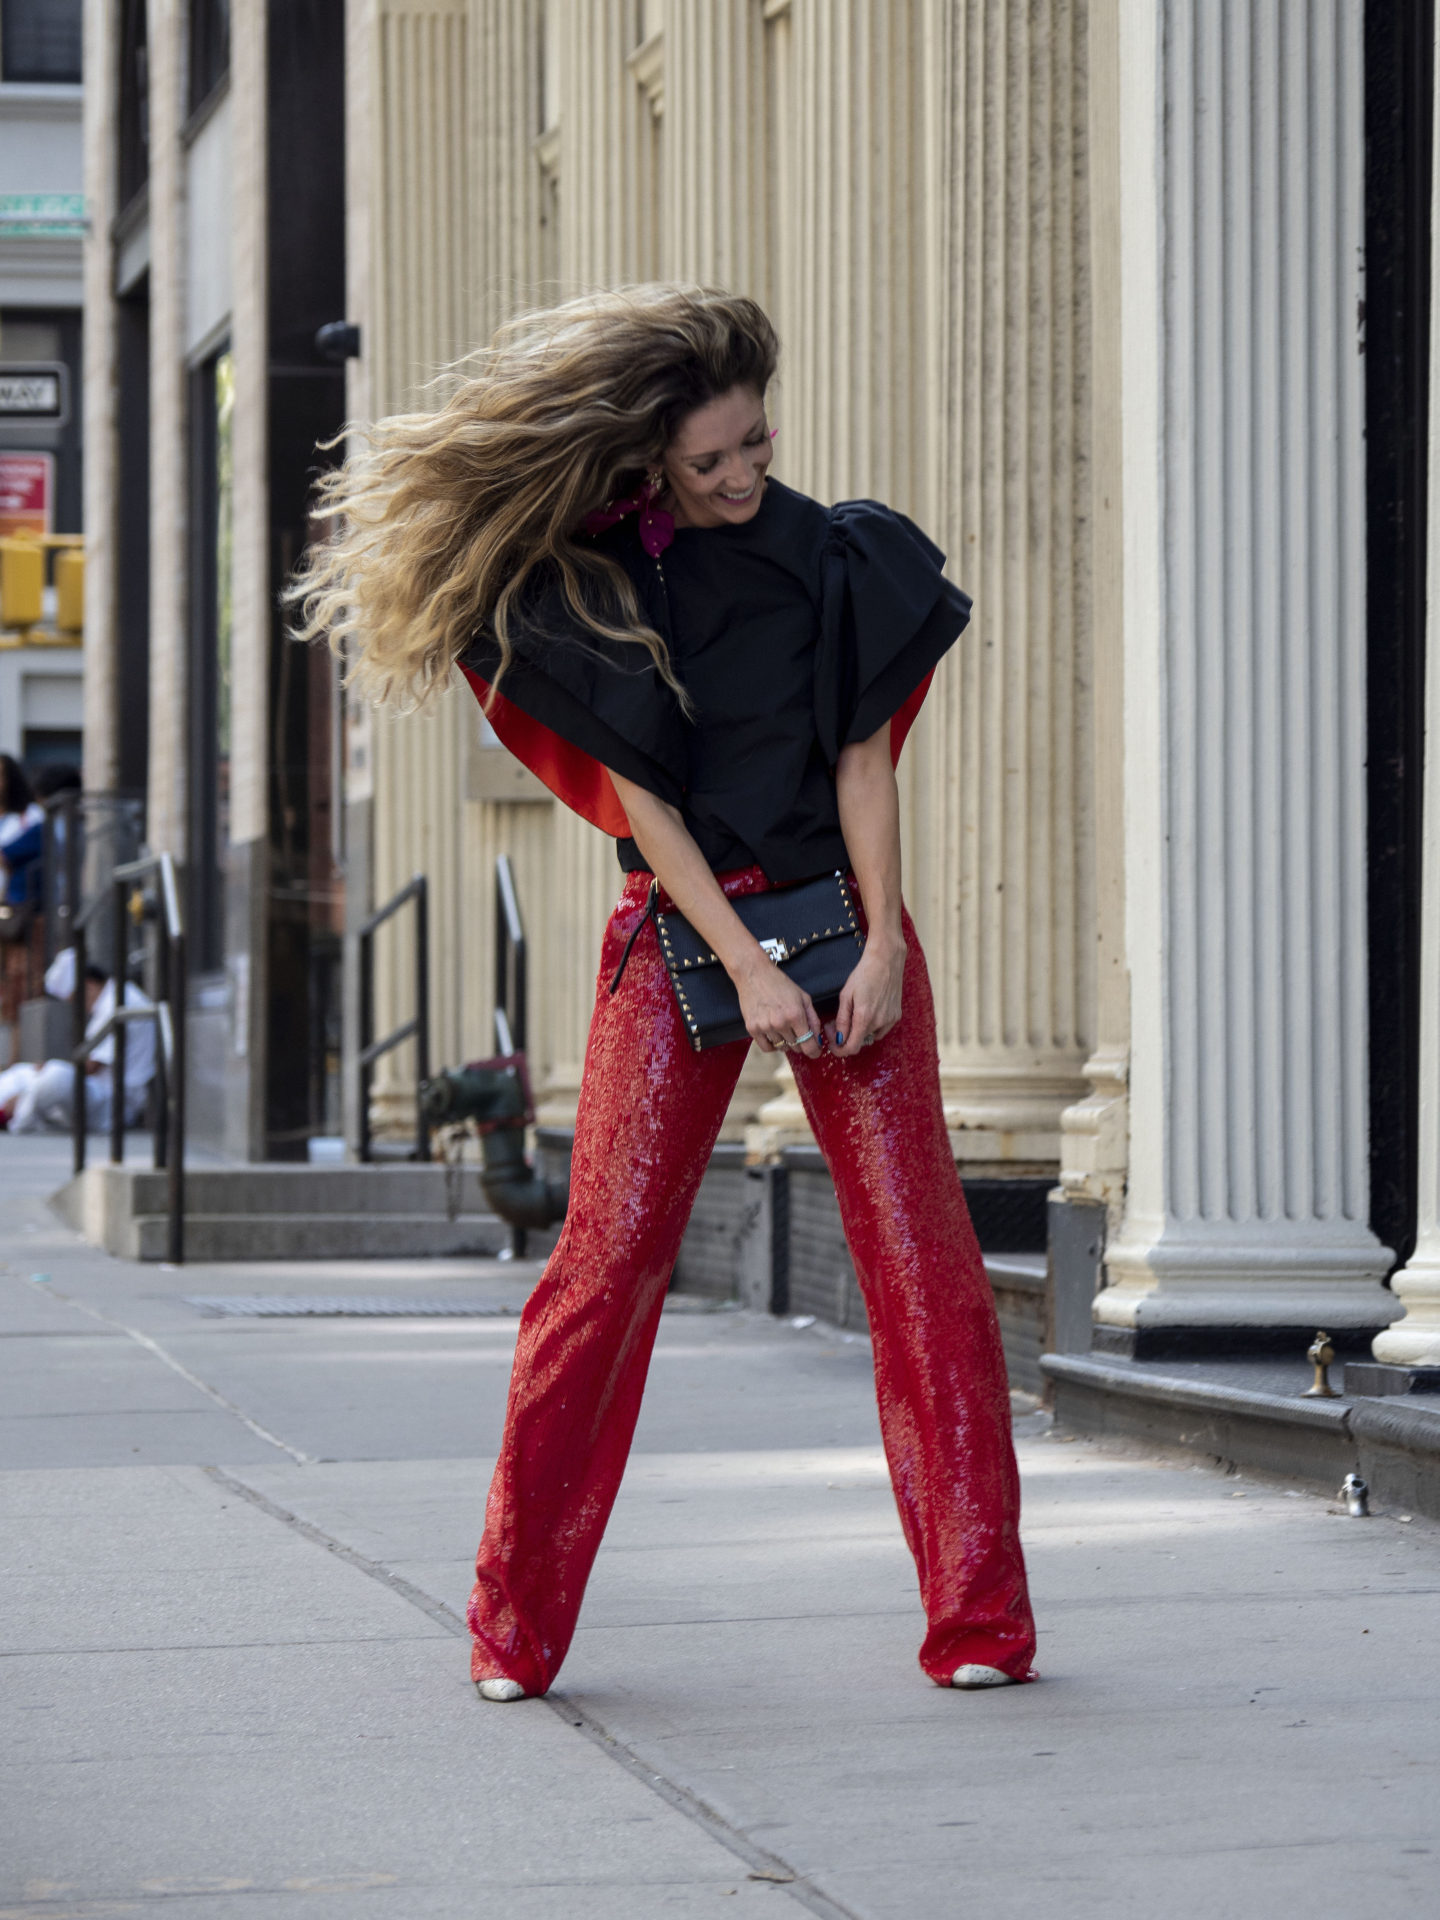 red sequin pants and tips for how to recognize when you're hungry.